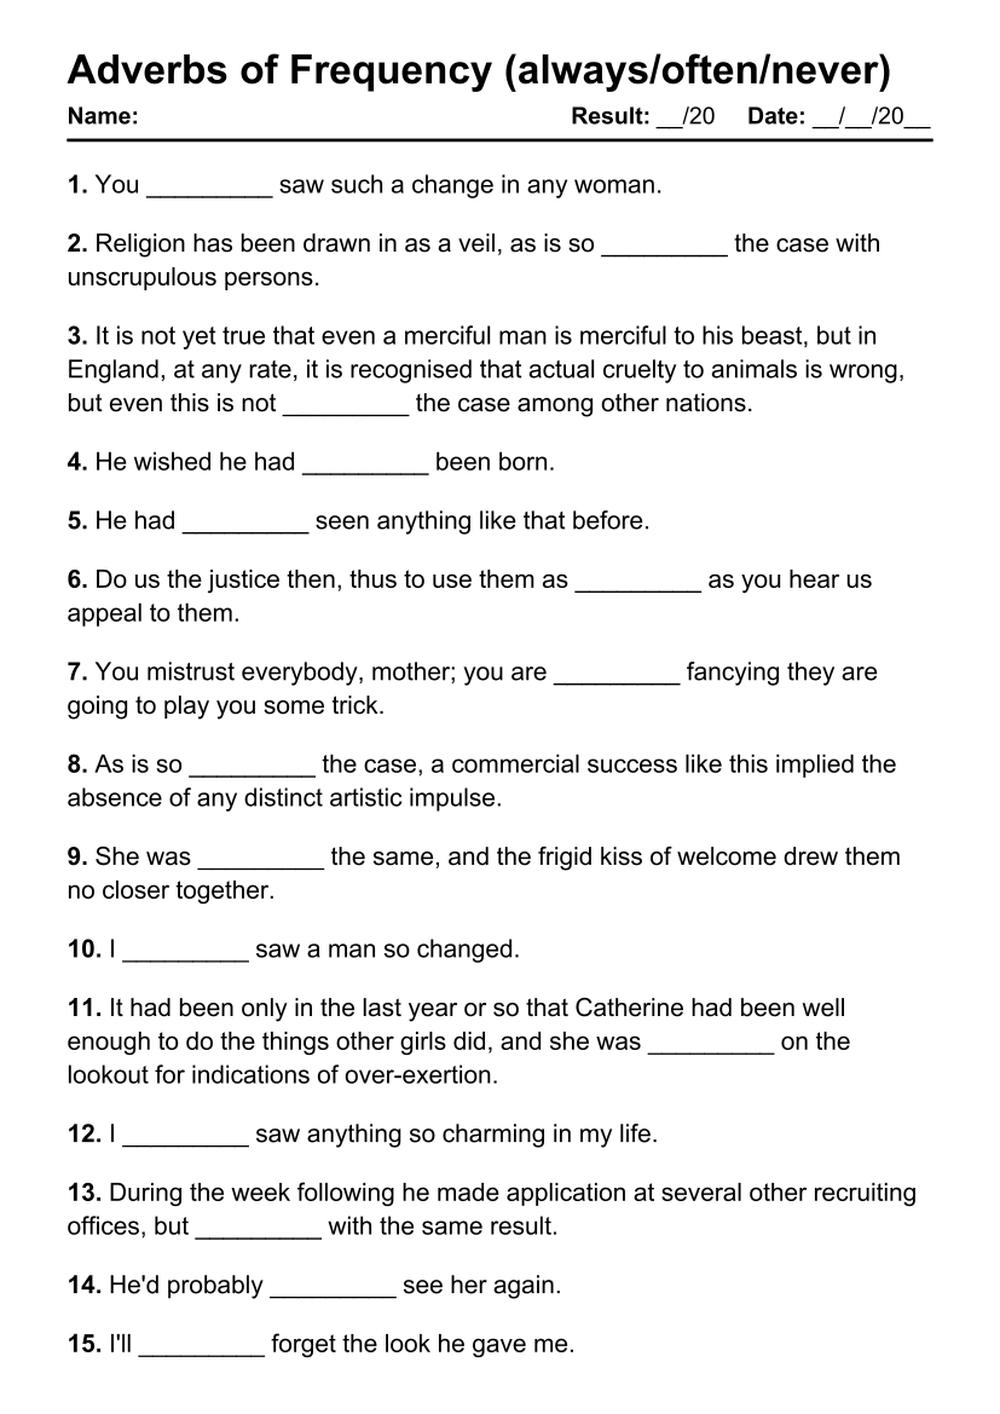 Printable Adverbs of Frequency Exercises - PDF Worksheet with Answers - Test 15